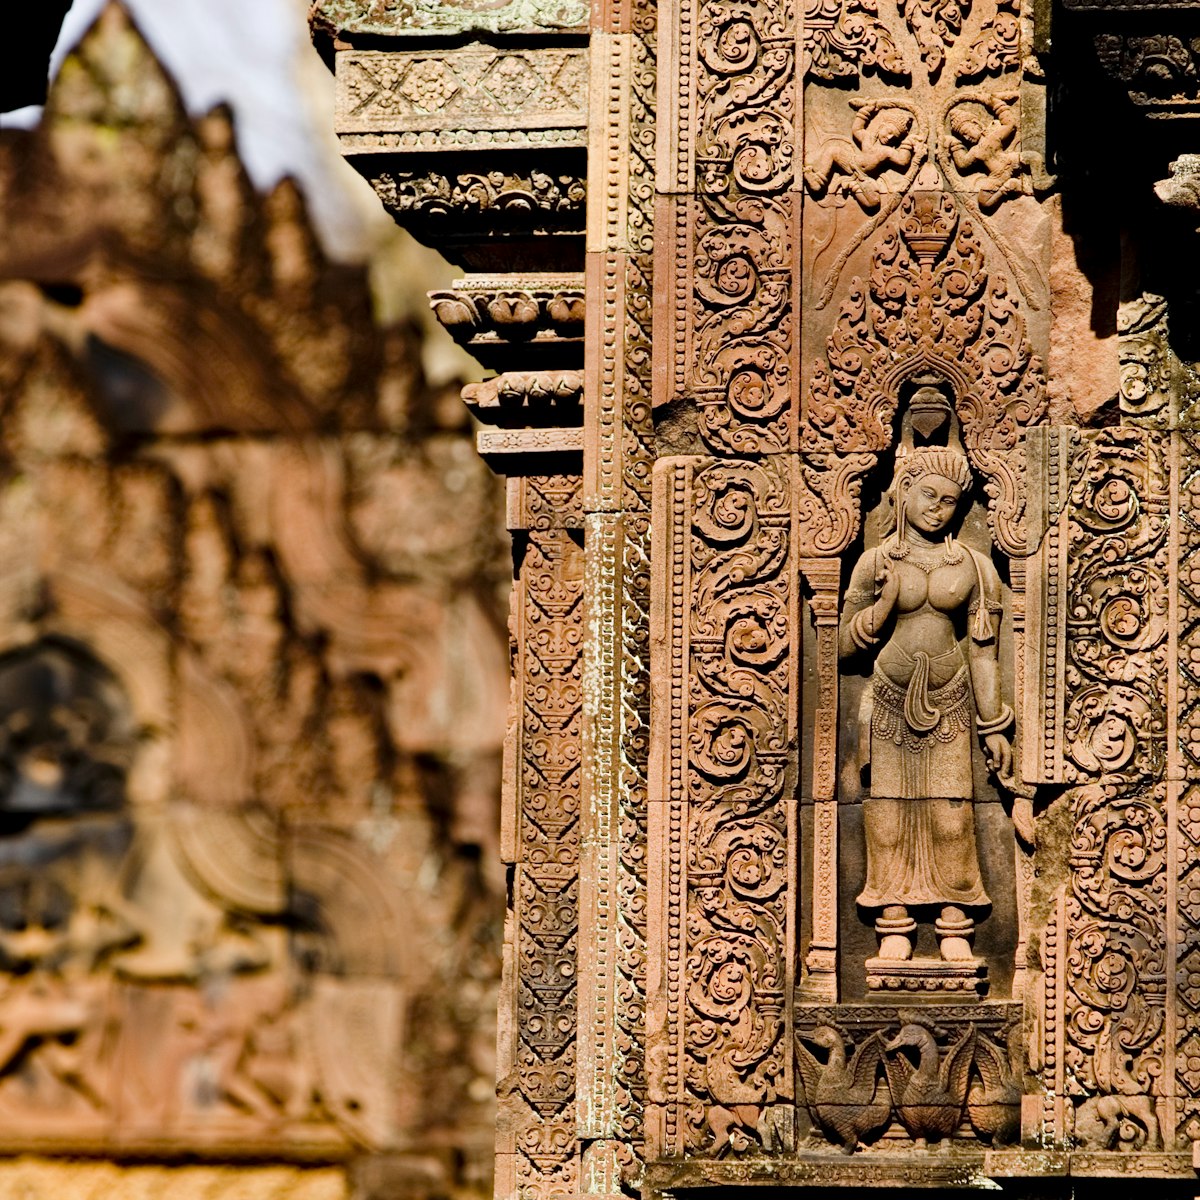 26408-45
Asia, Cambodia, Siem Reap, South-East Asia, aged, architecture, architecture and art, art, built structure, carving, close-up, culture, day, female likeness, focus on foreground, history, horizontal, human representation, no people, old, outdoors, past, sculpture, statue, wall
Bas-relief detail, Banteay Srei.